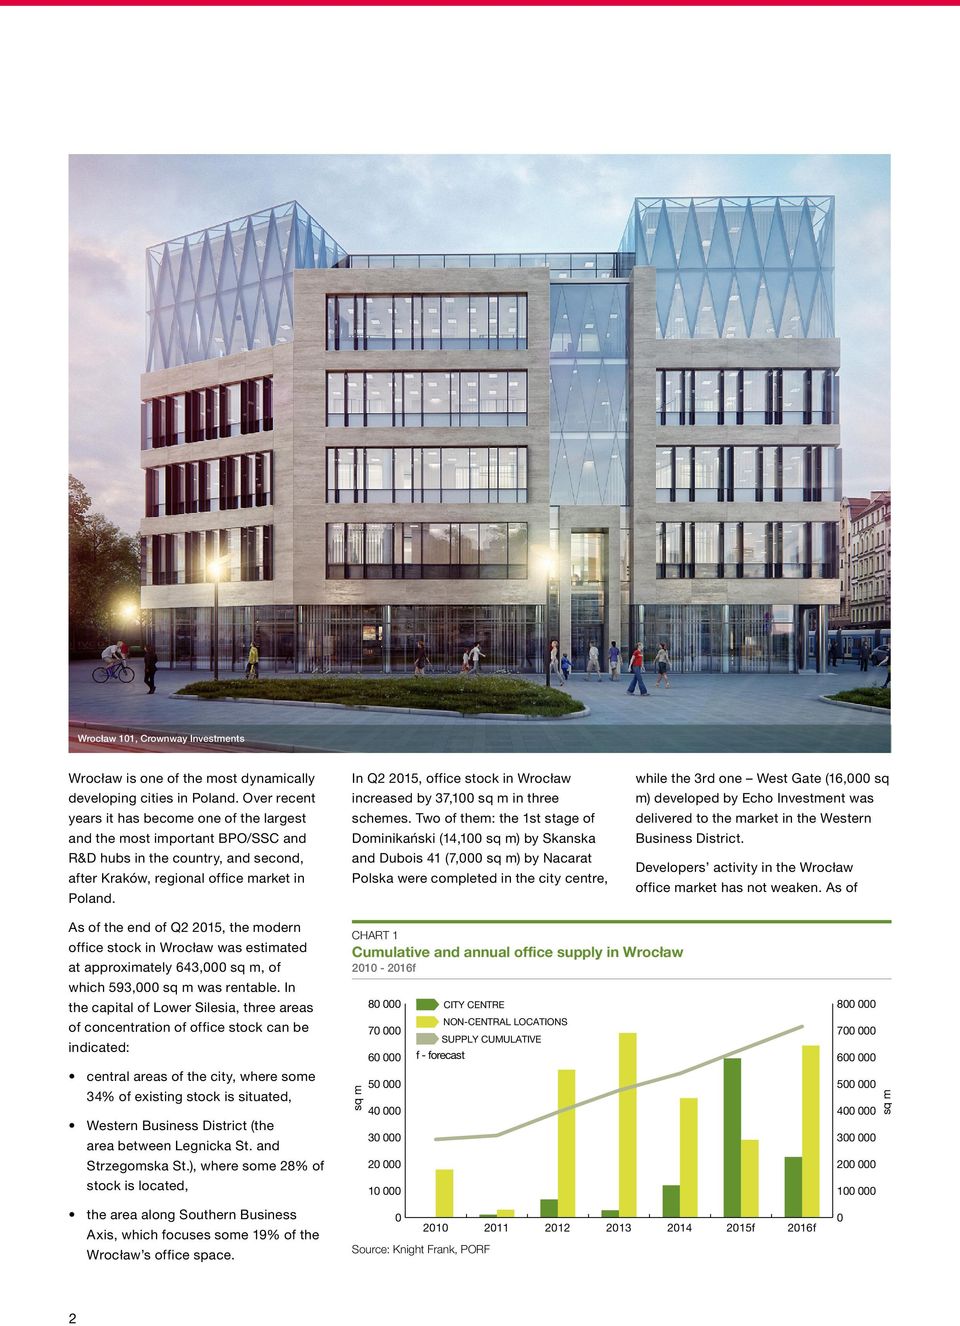 In Q2 215, office stock in Wrocław increased by 37,1 sq m in three schemes.